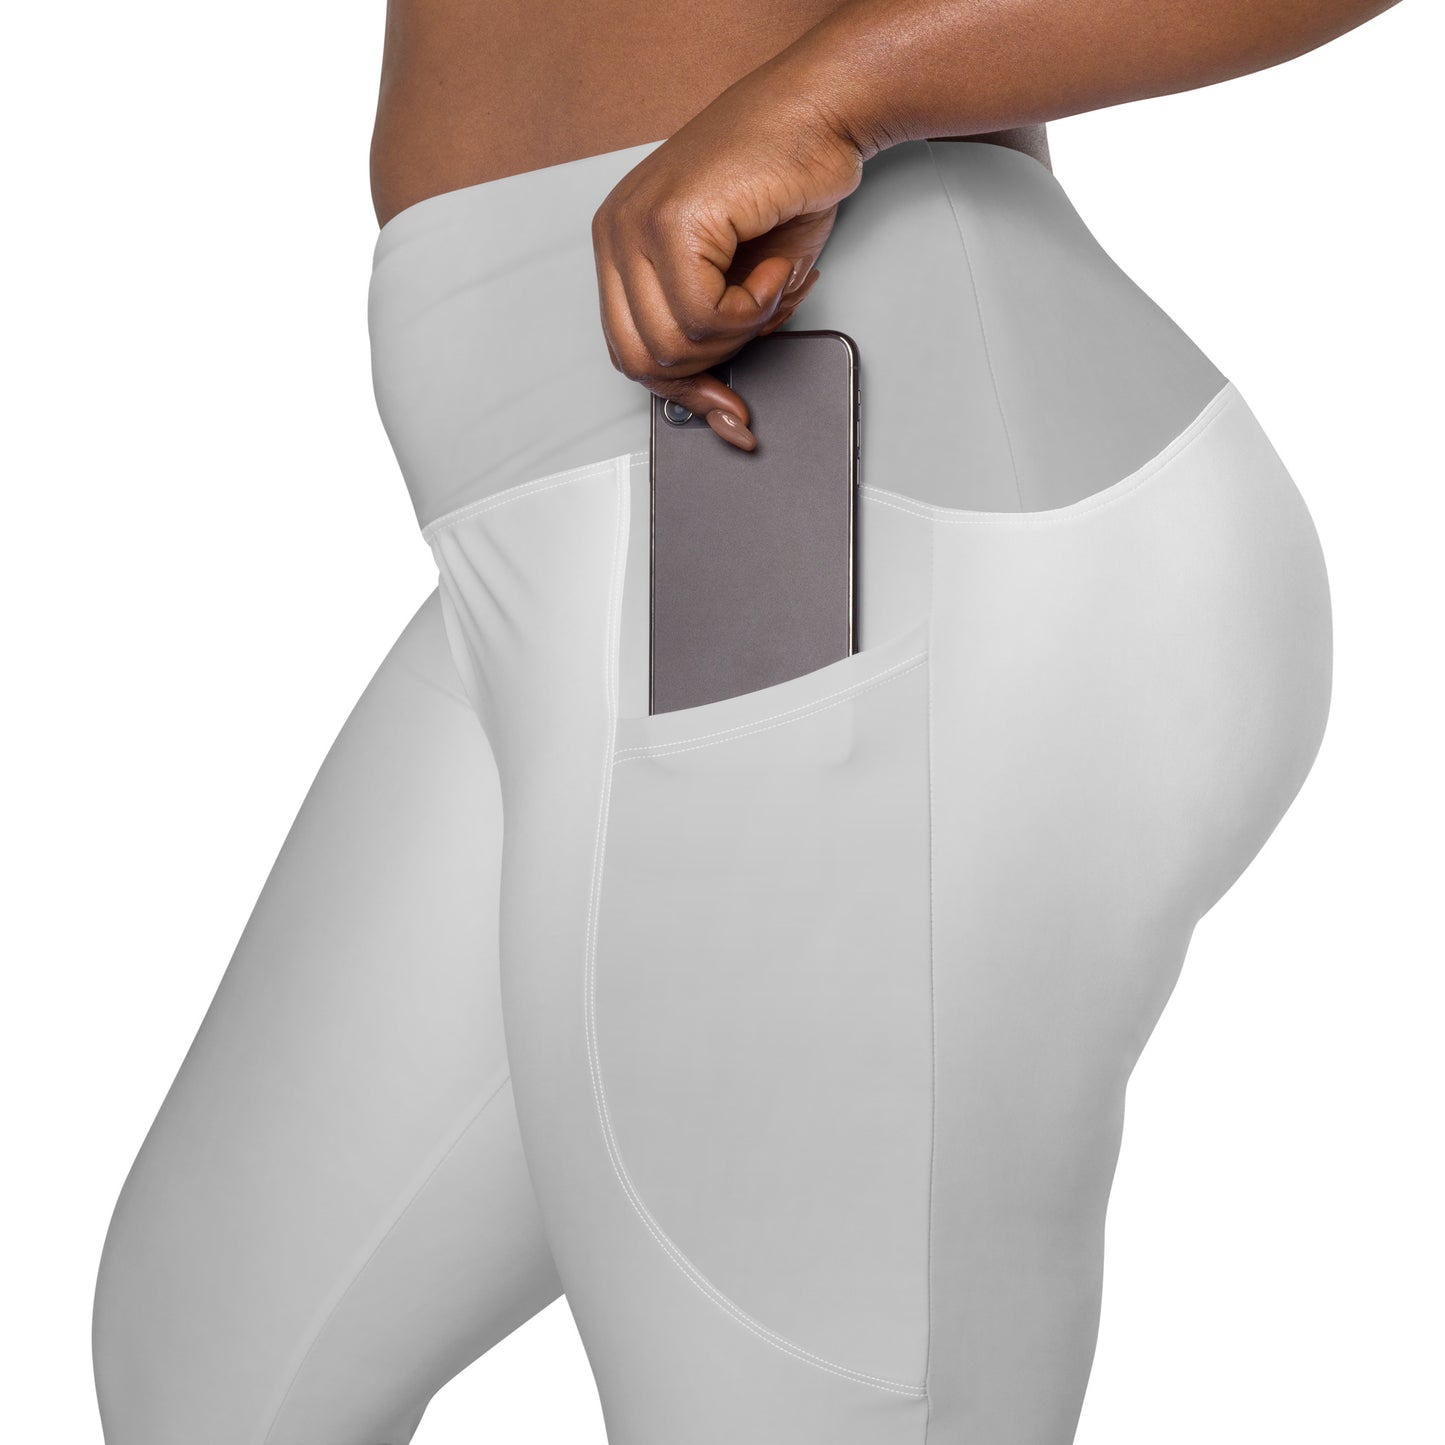 LBS Silver Spotlight Leggings with Pockets - Plus Size